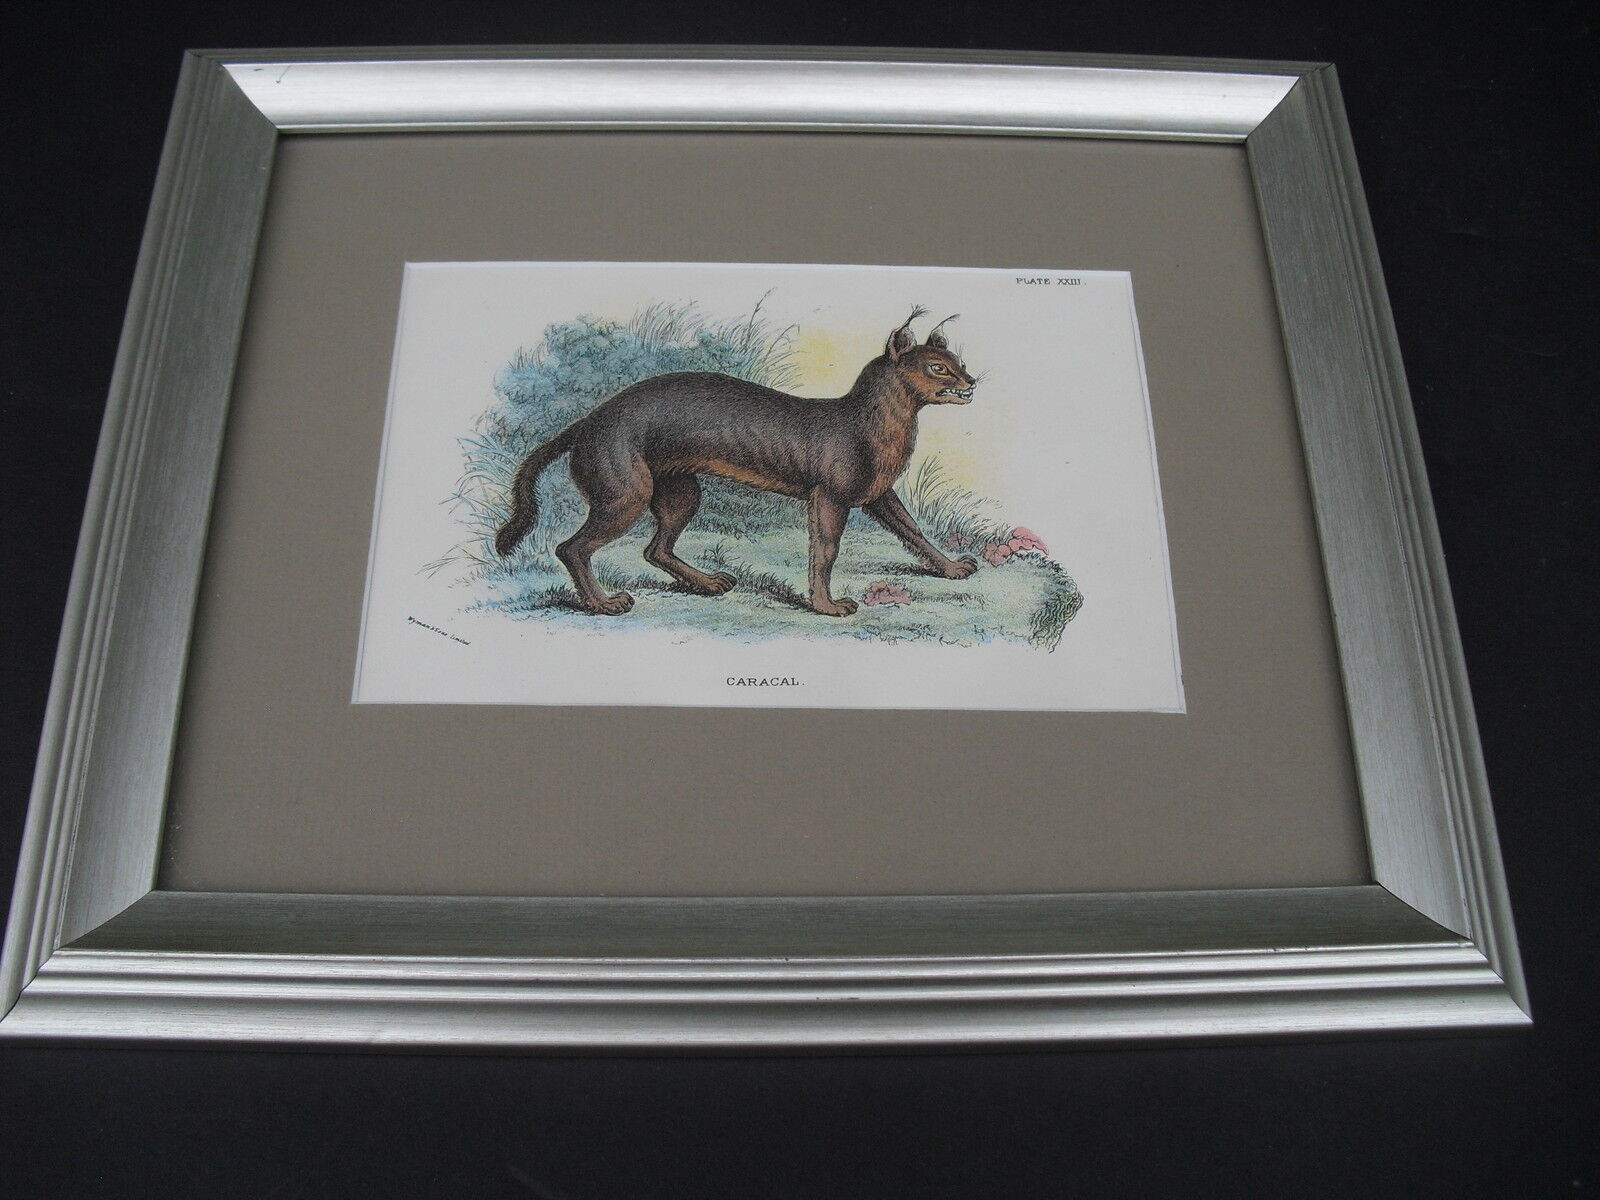 CARACAL Original 1896 Lloyd\'s Natural History Chromolithograph  Matted Framed